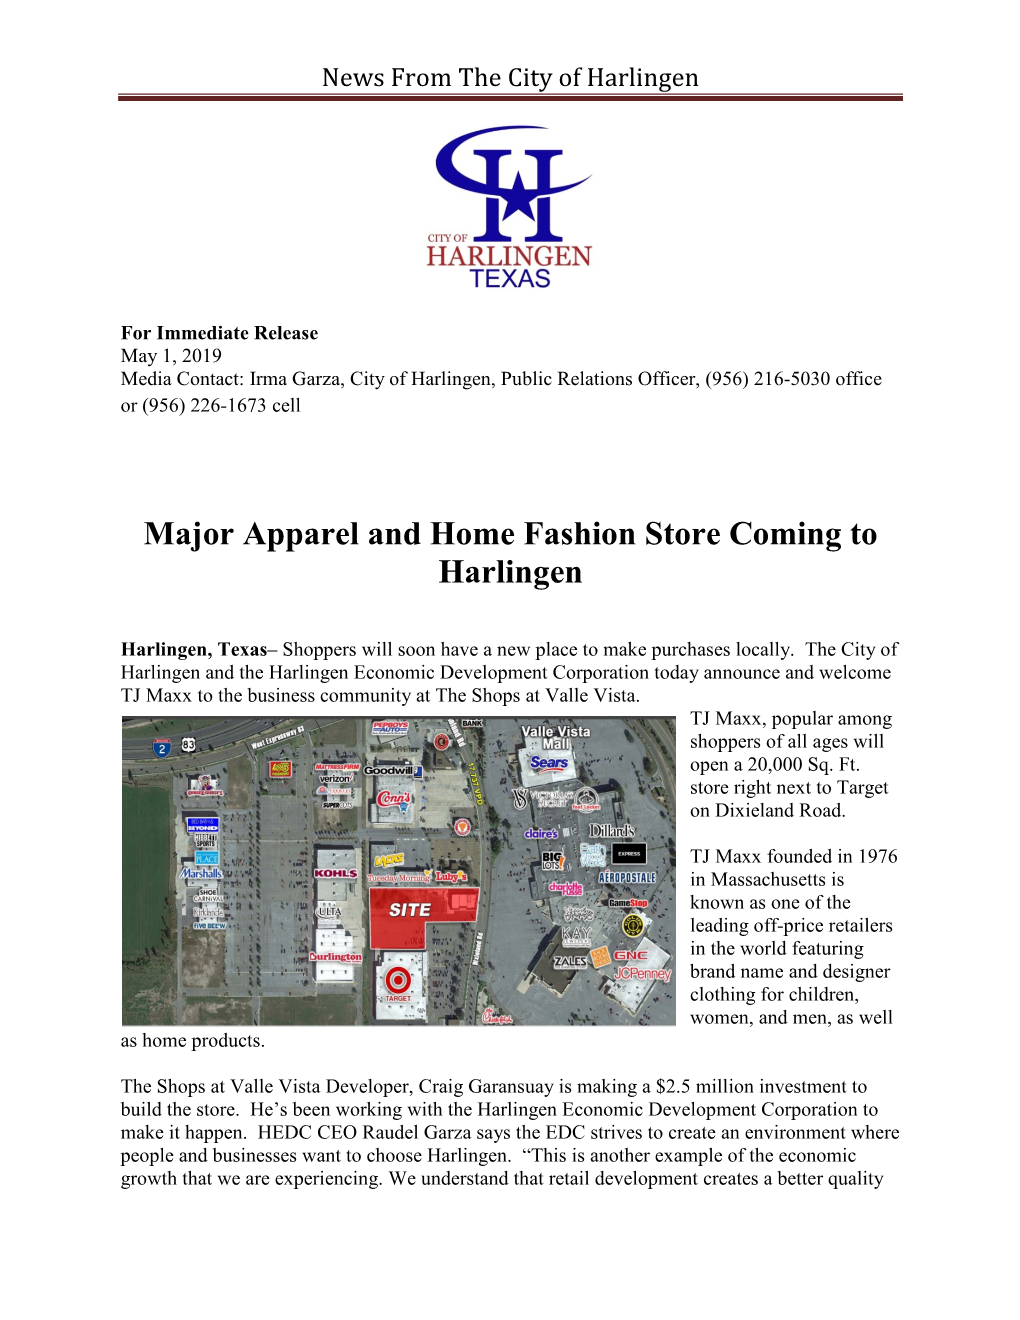 News from the City of Harlingen